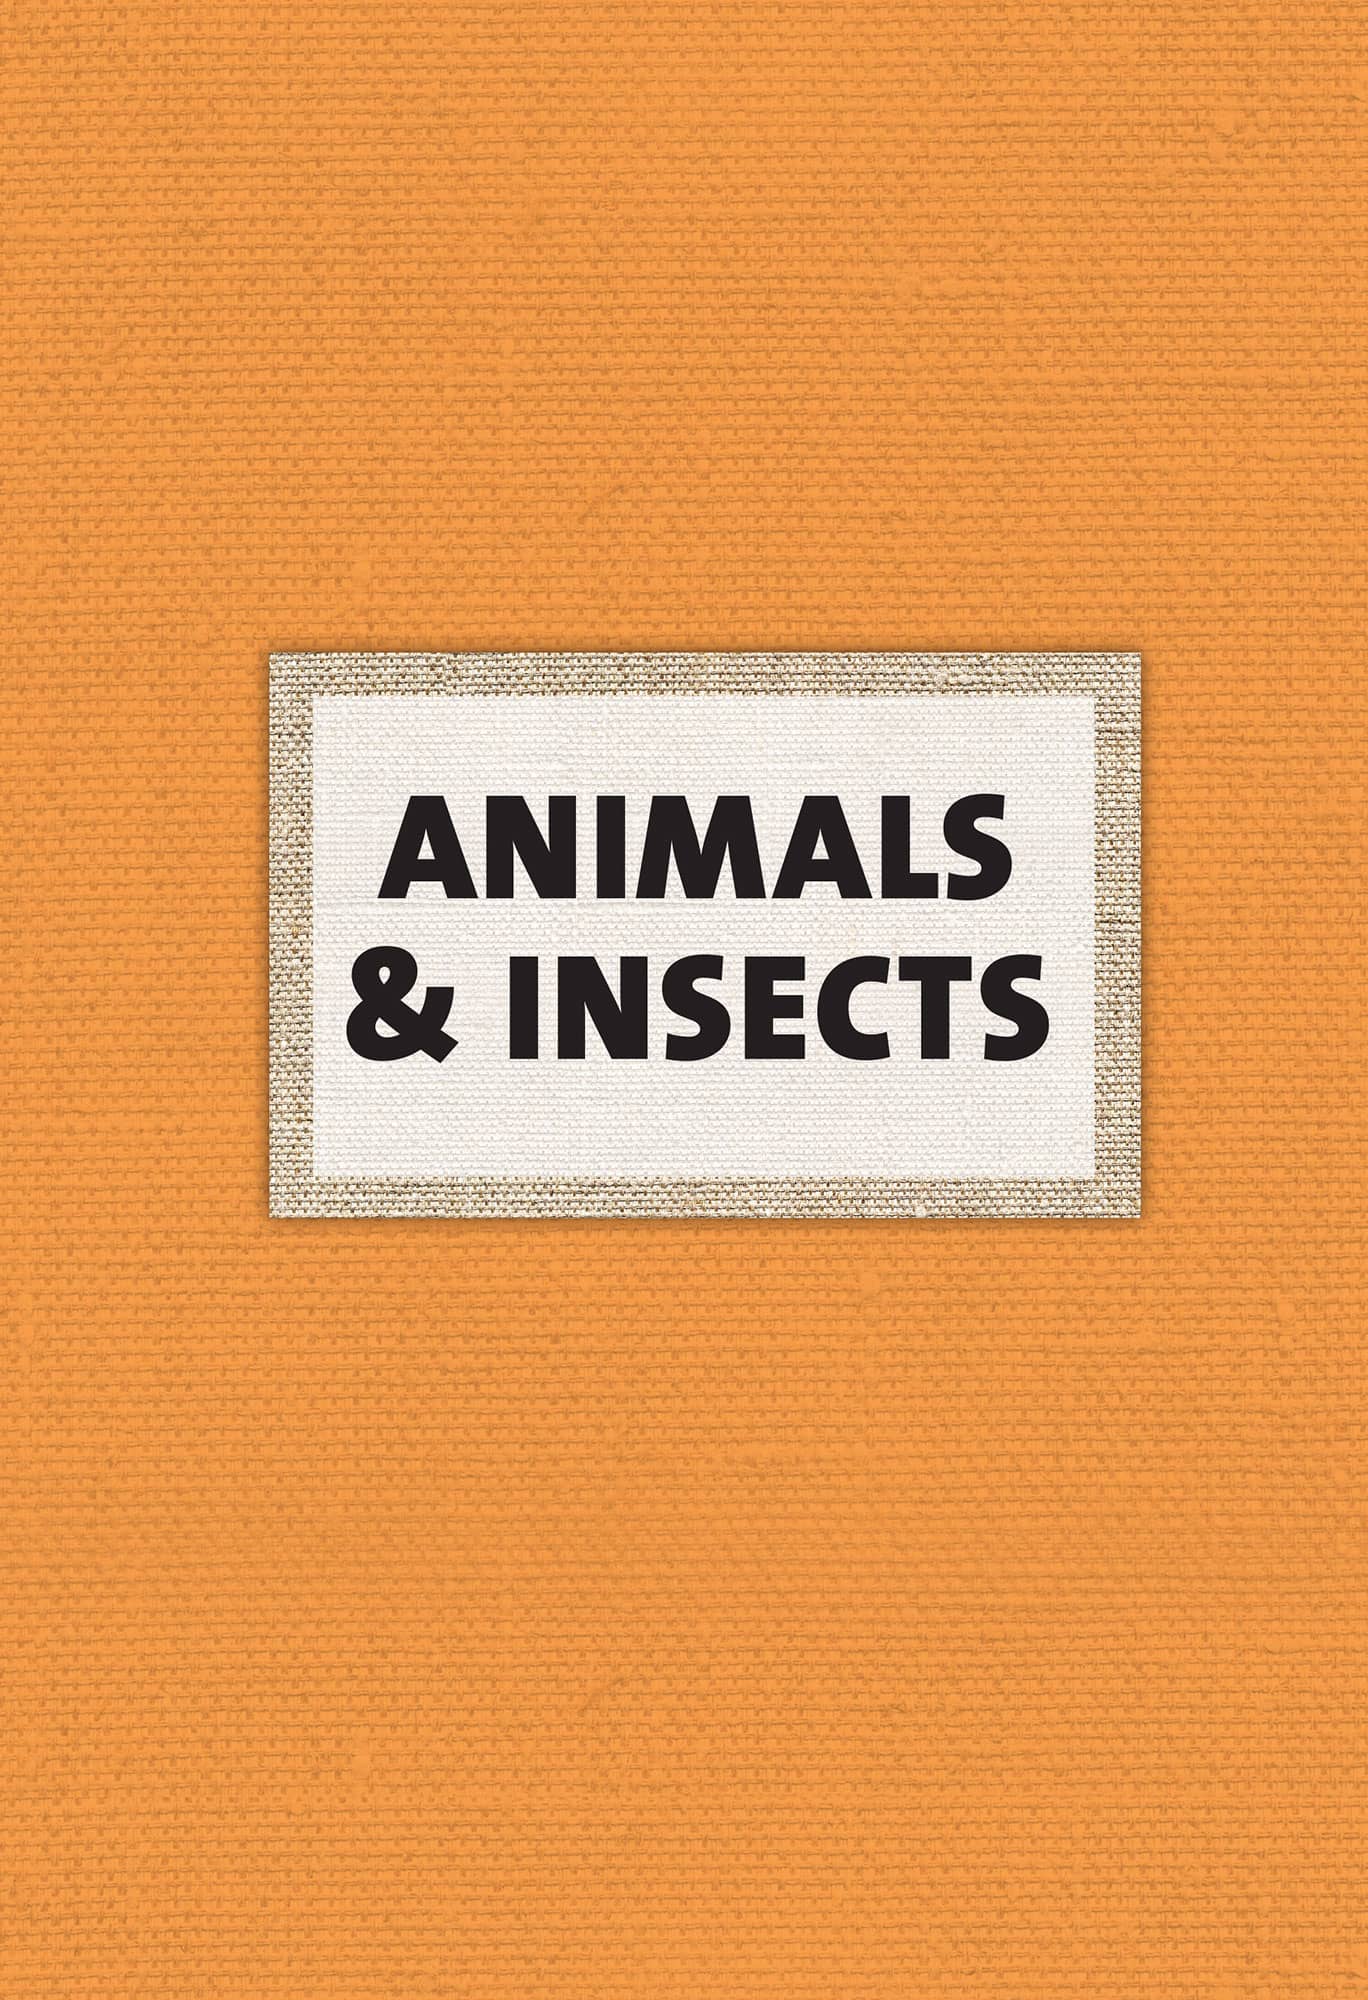 ANIMALS & INSECTS